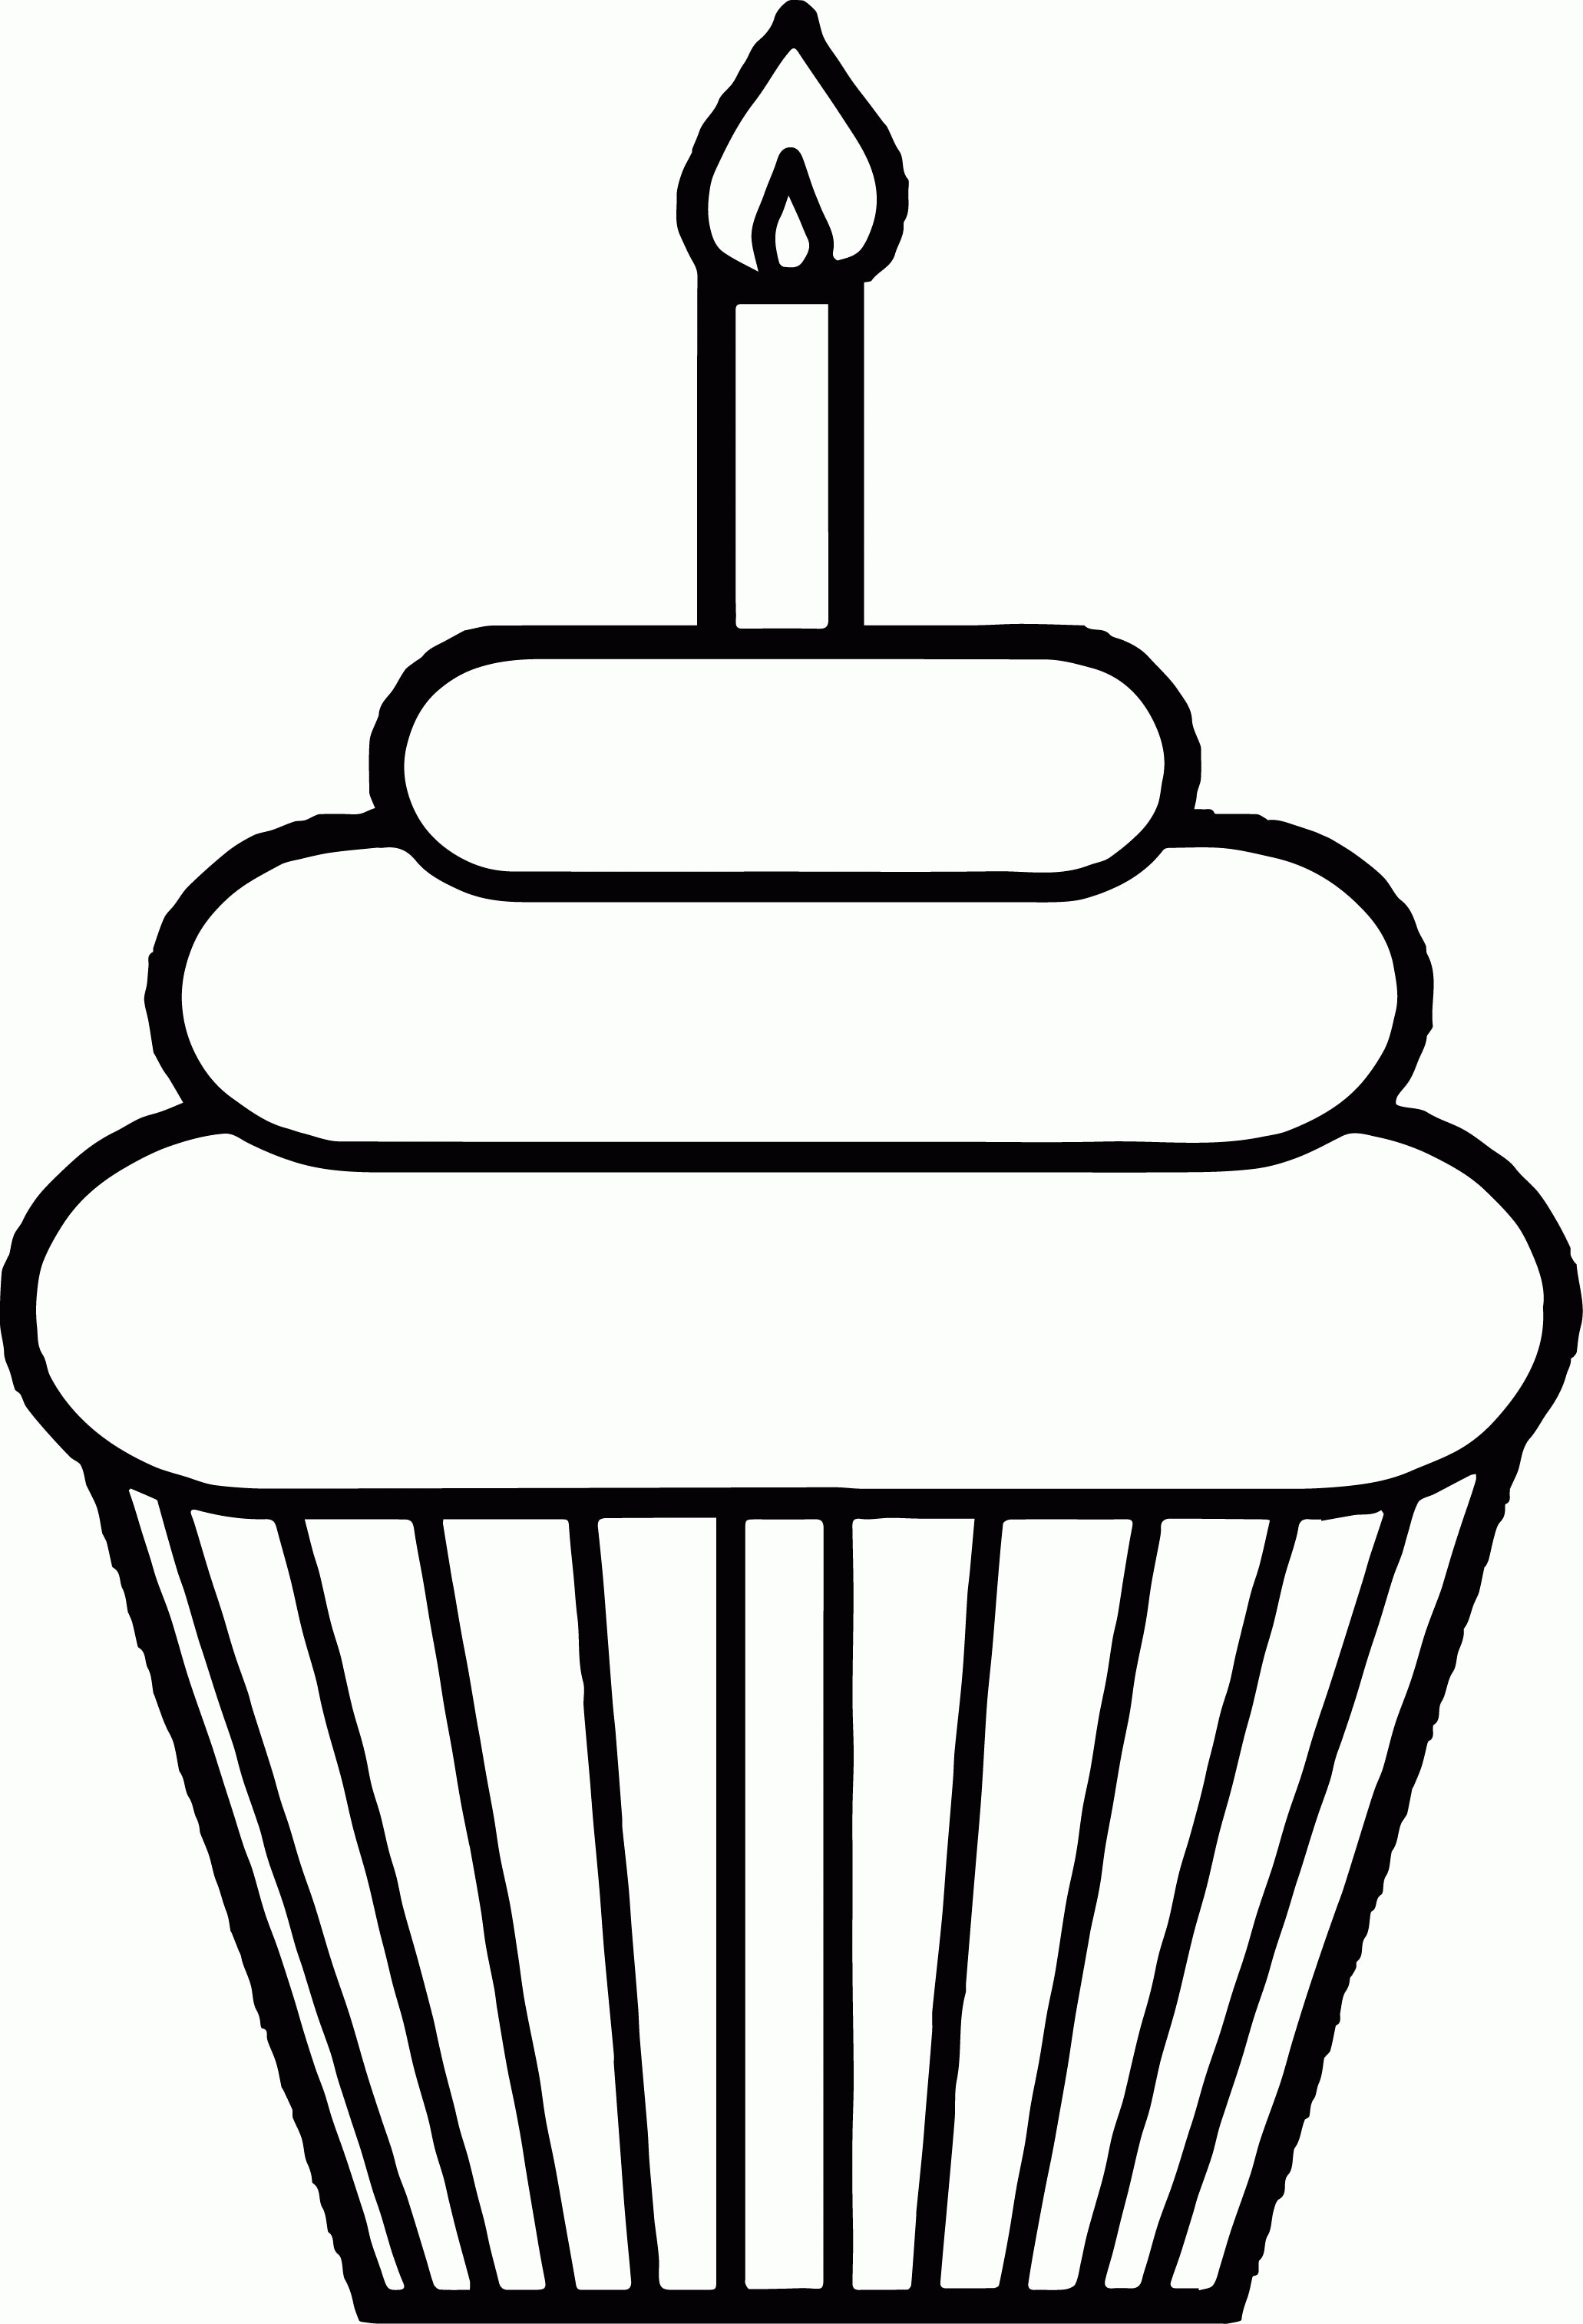 Cup Cake Coloring Page - Coloring Page